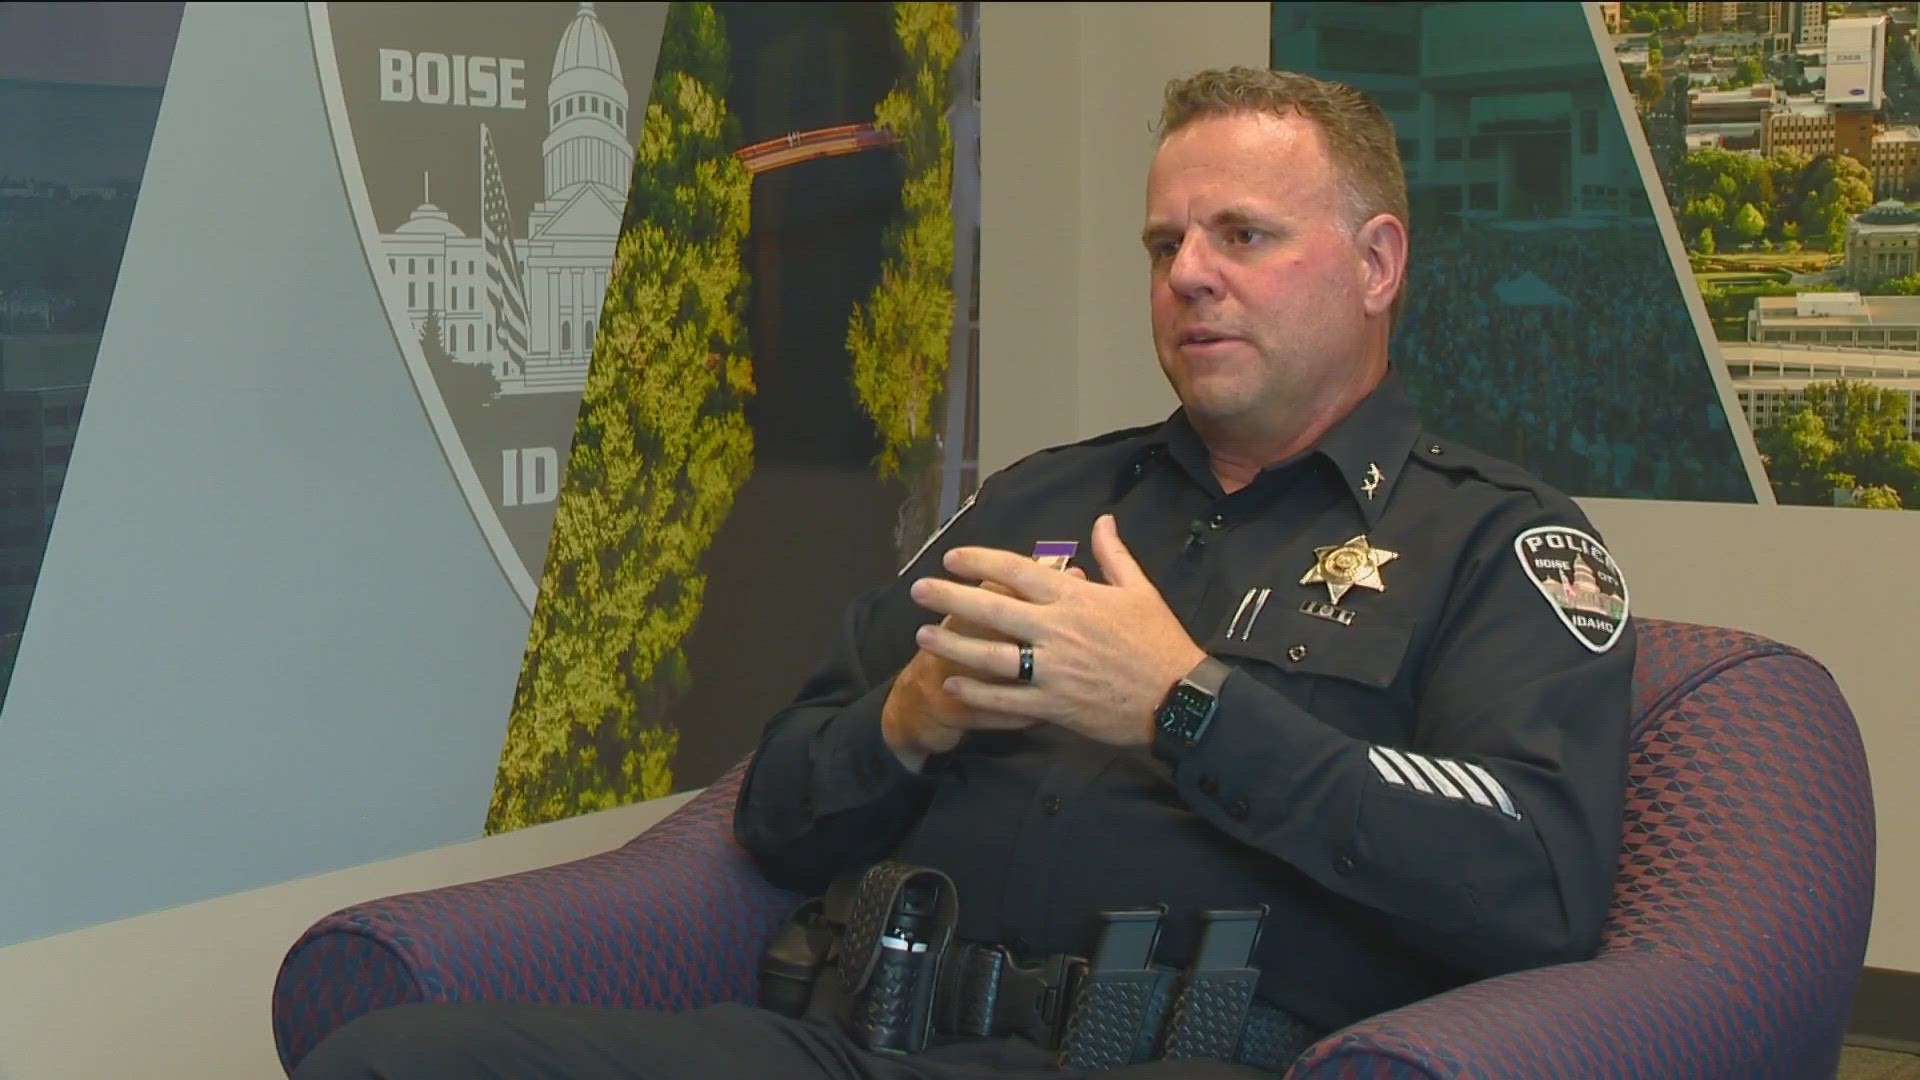 Boise Police Chief Ron Winegar said he was grateful the investigation's results confirmed what he knew to be true.